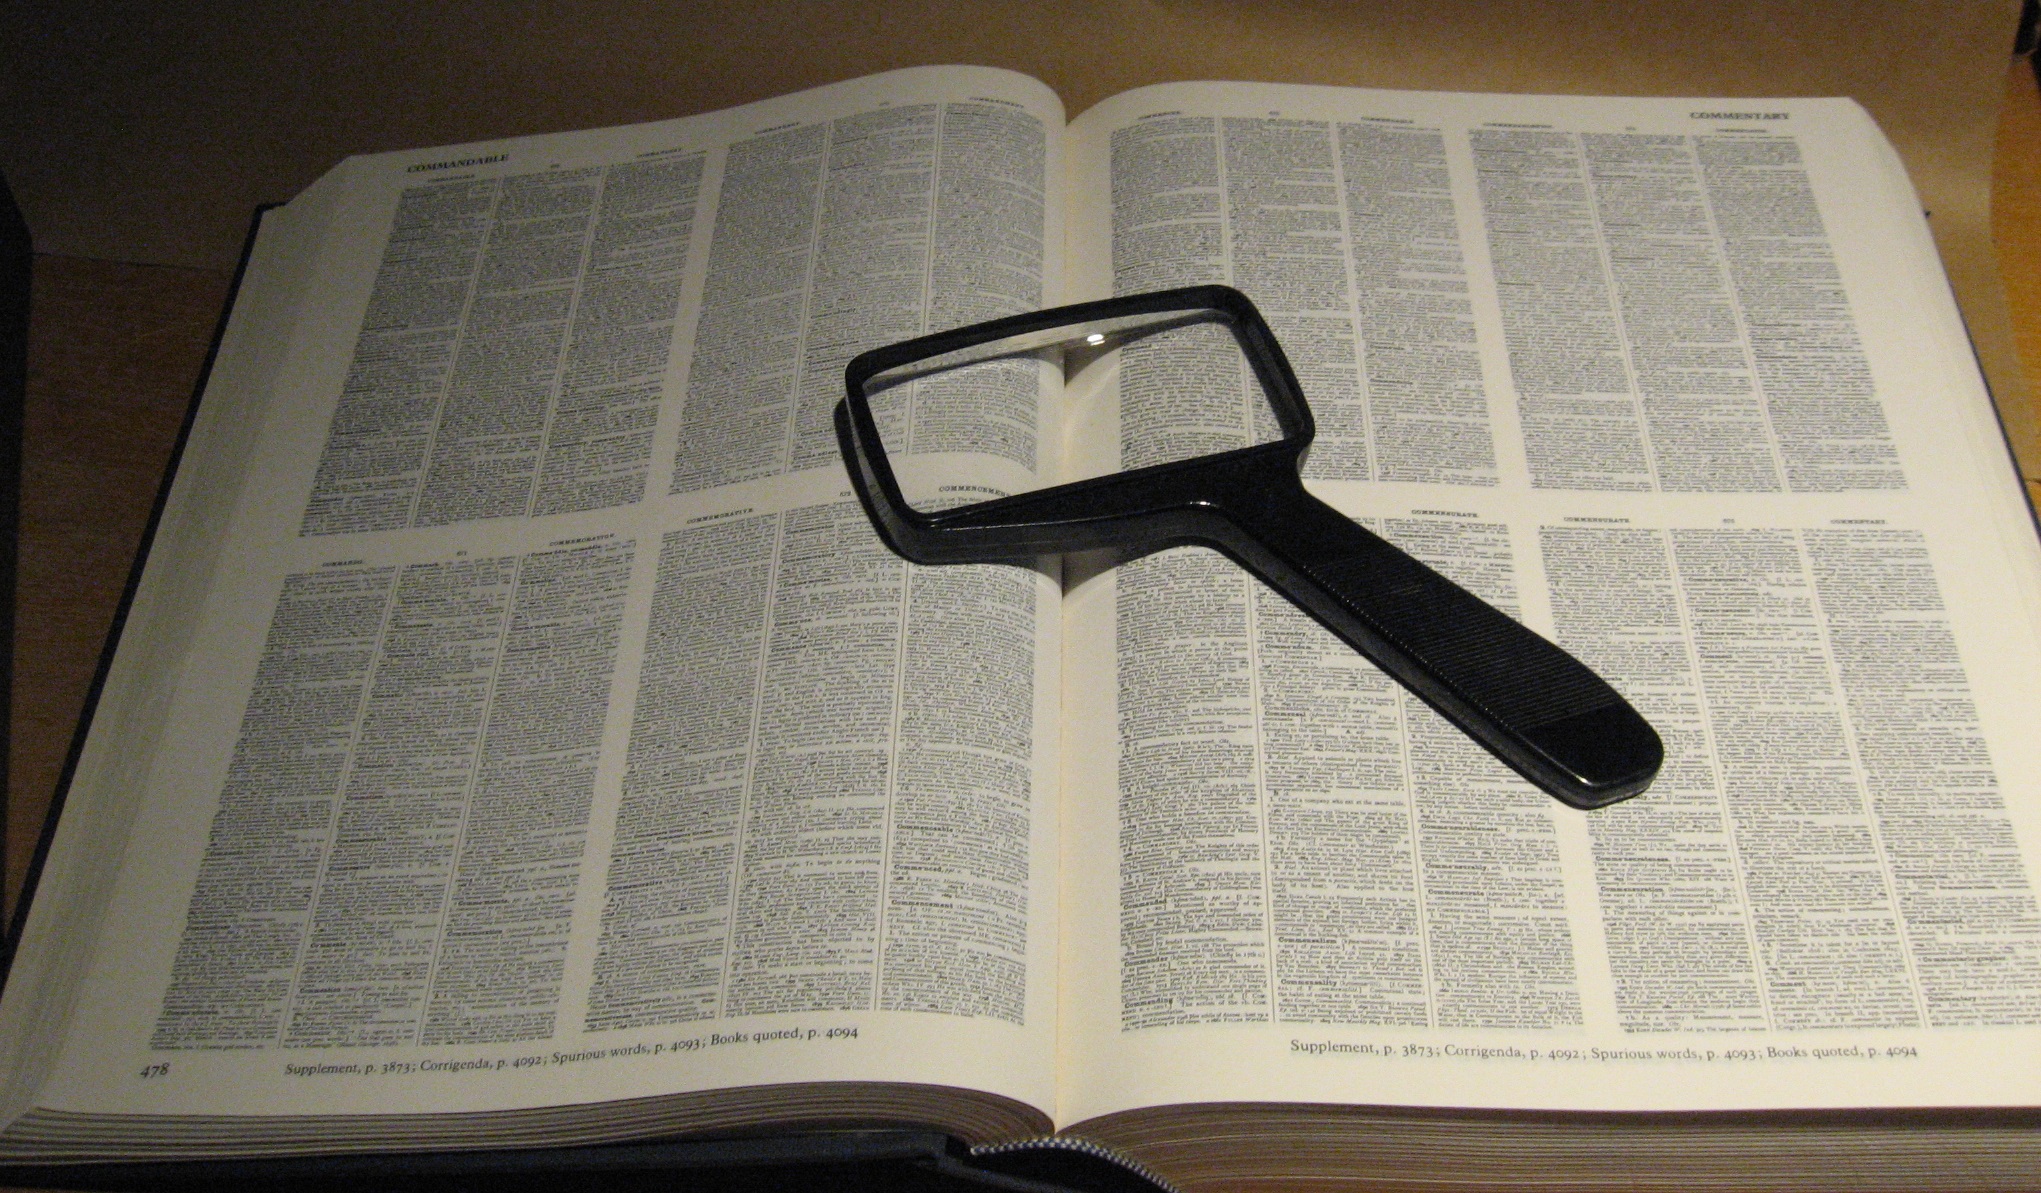 what-was-the-model-number-of-the-bausch-and-lomb-magnifier-included-with-the-oed